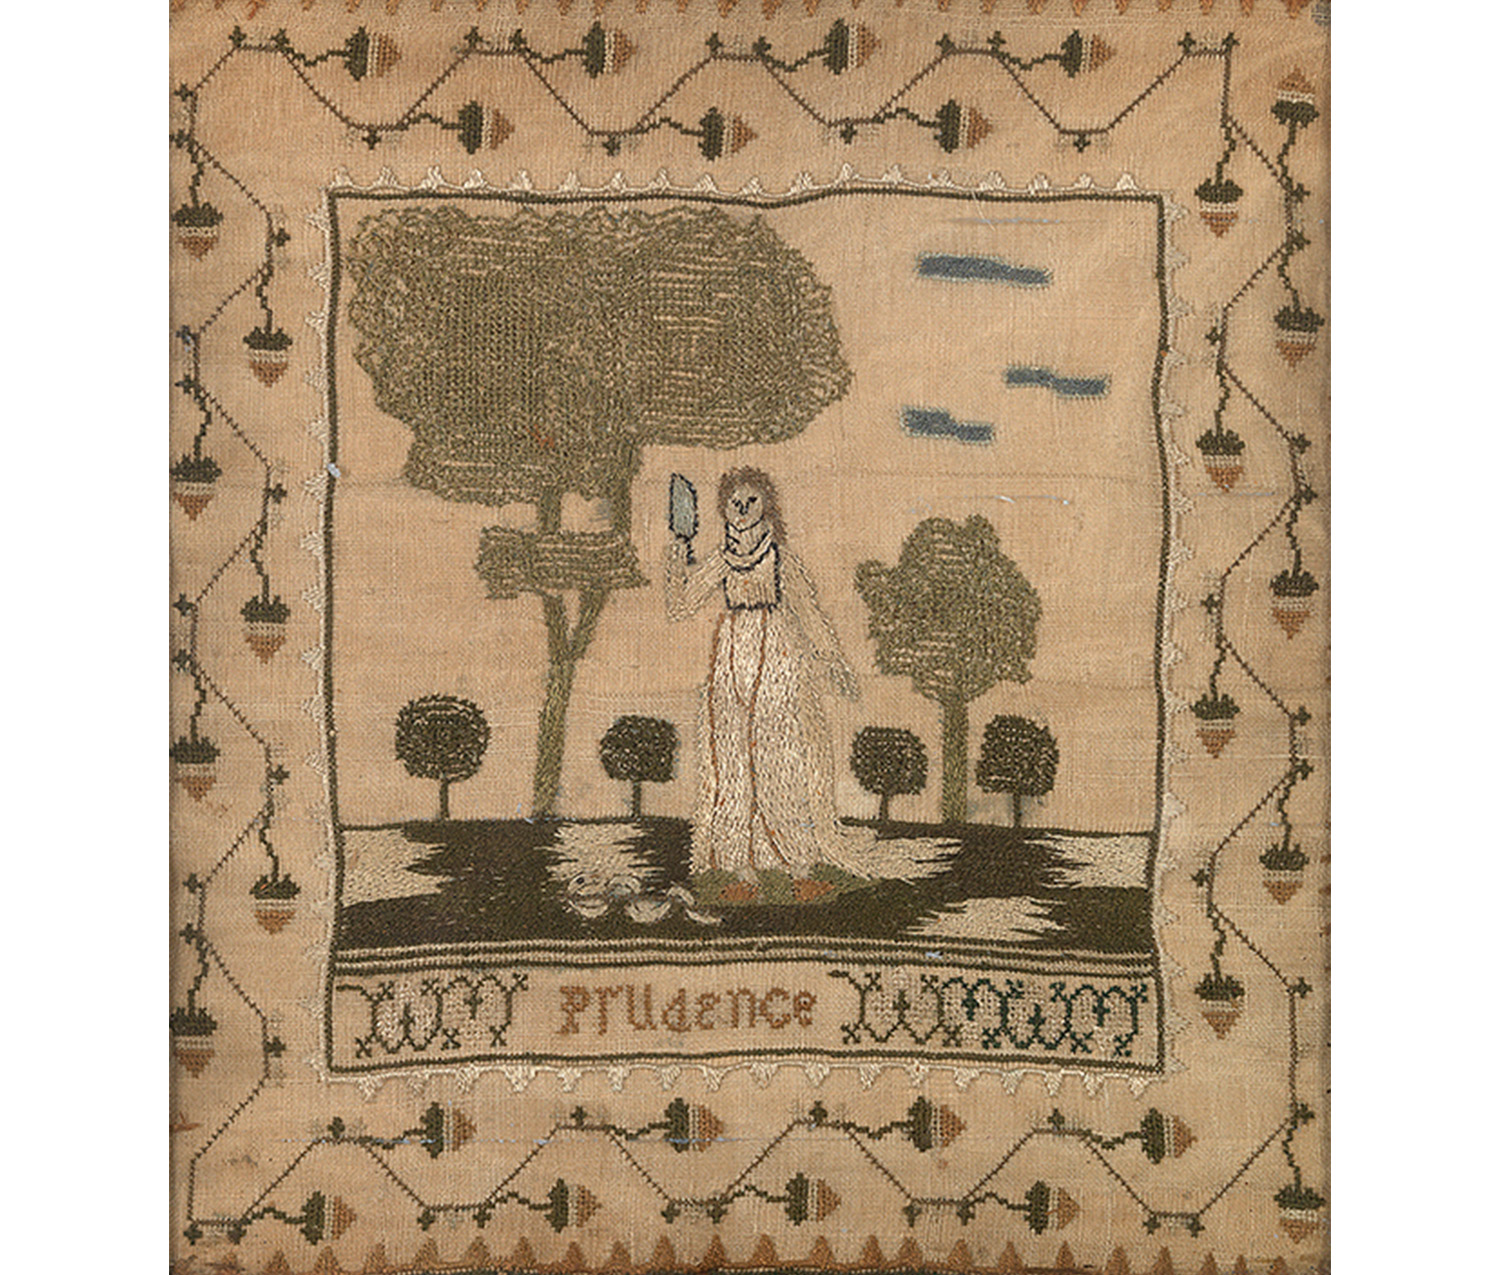 woman in white standing in flat landscape with large tree to her left, small one to her right and four smaller trees across back, three clouds in the sky, PRUDENCE embroidered beneath all surrounded by stylized vine